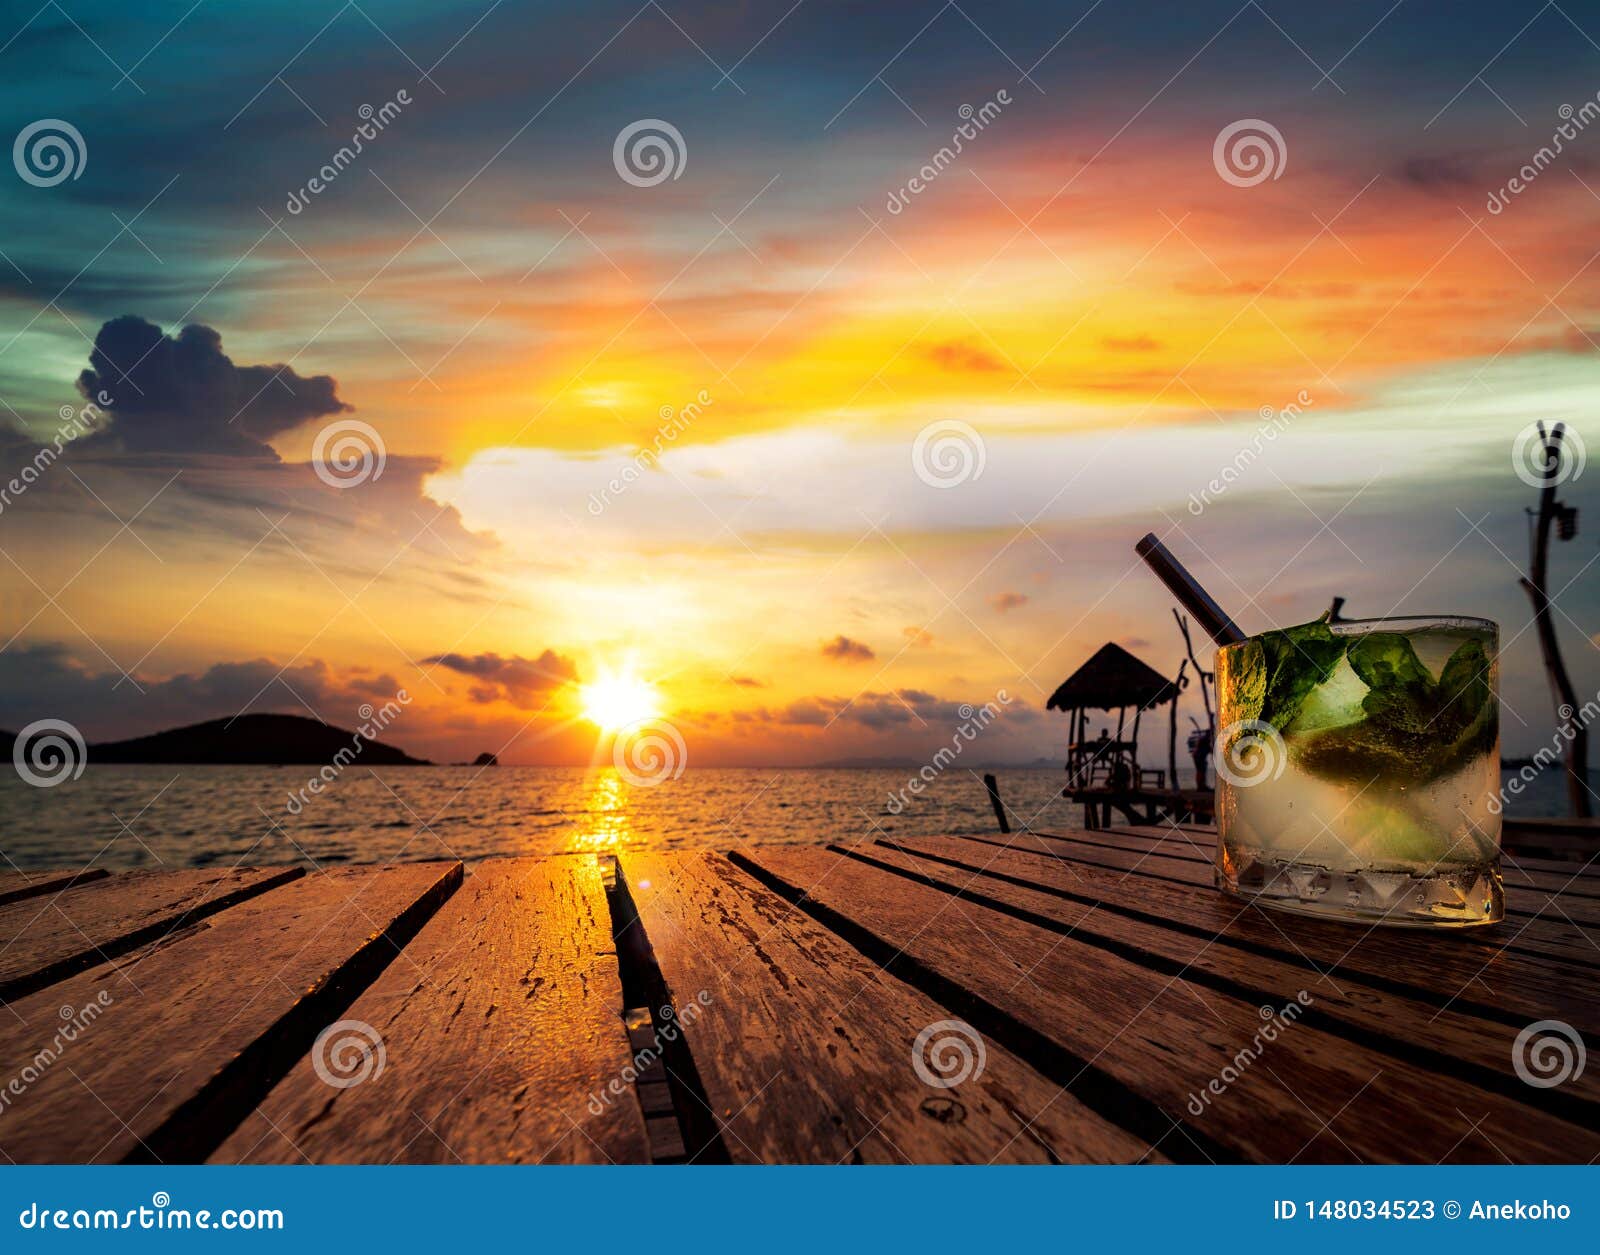 Mojito Drinking with Sunset in Koh Mak Resort Stock Image - Image of ...